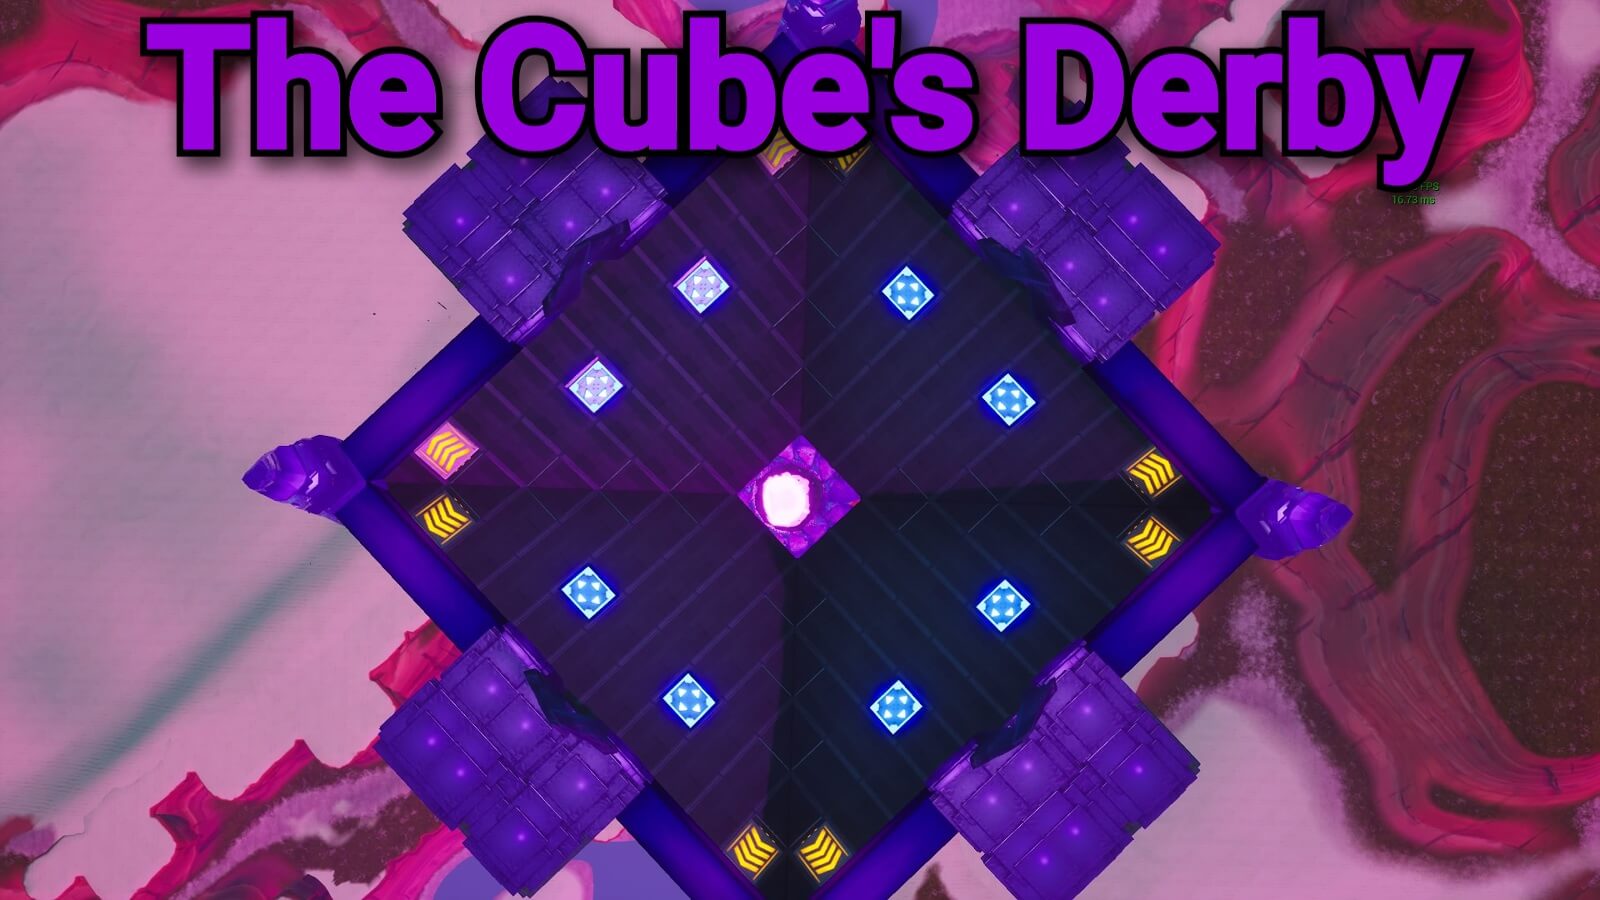 THE CUBE